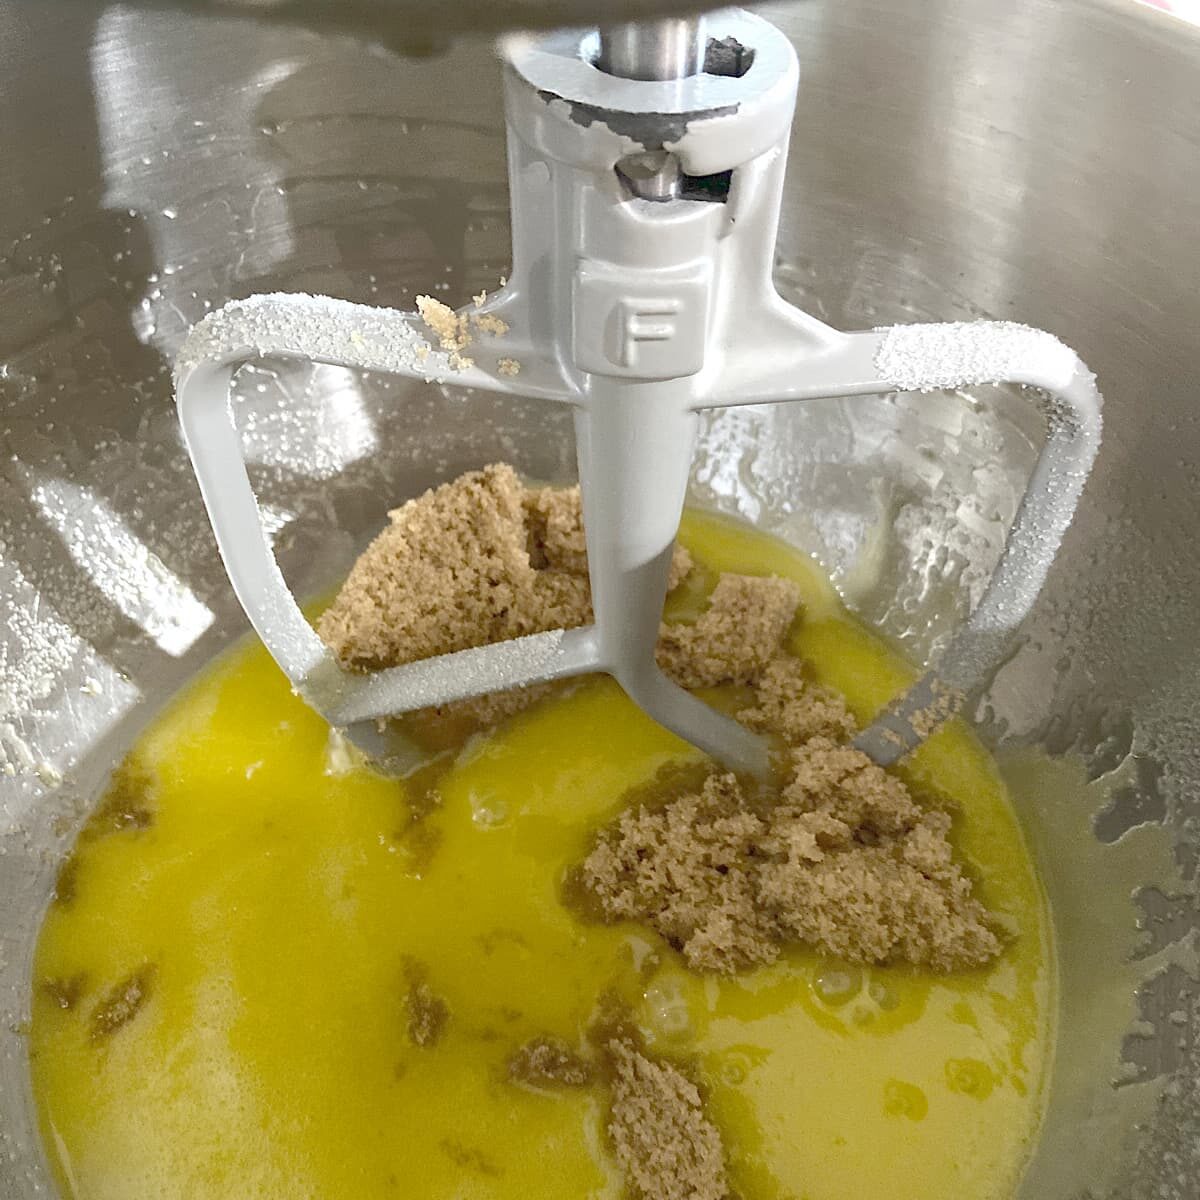 whisk eggs and sugar and other wet ingredients to a mixing bowl.